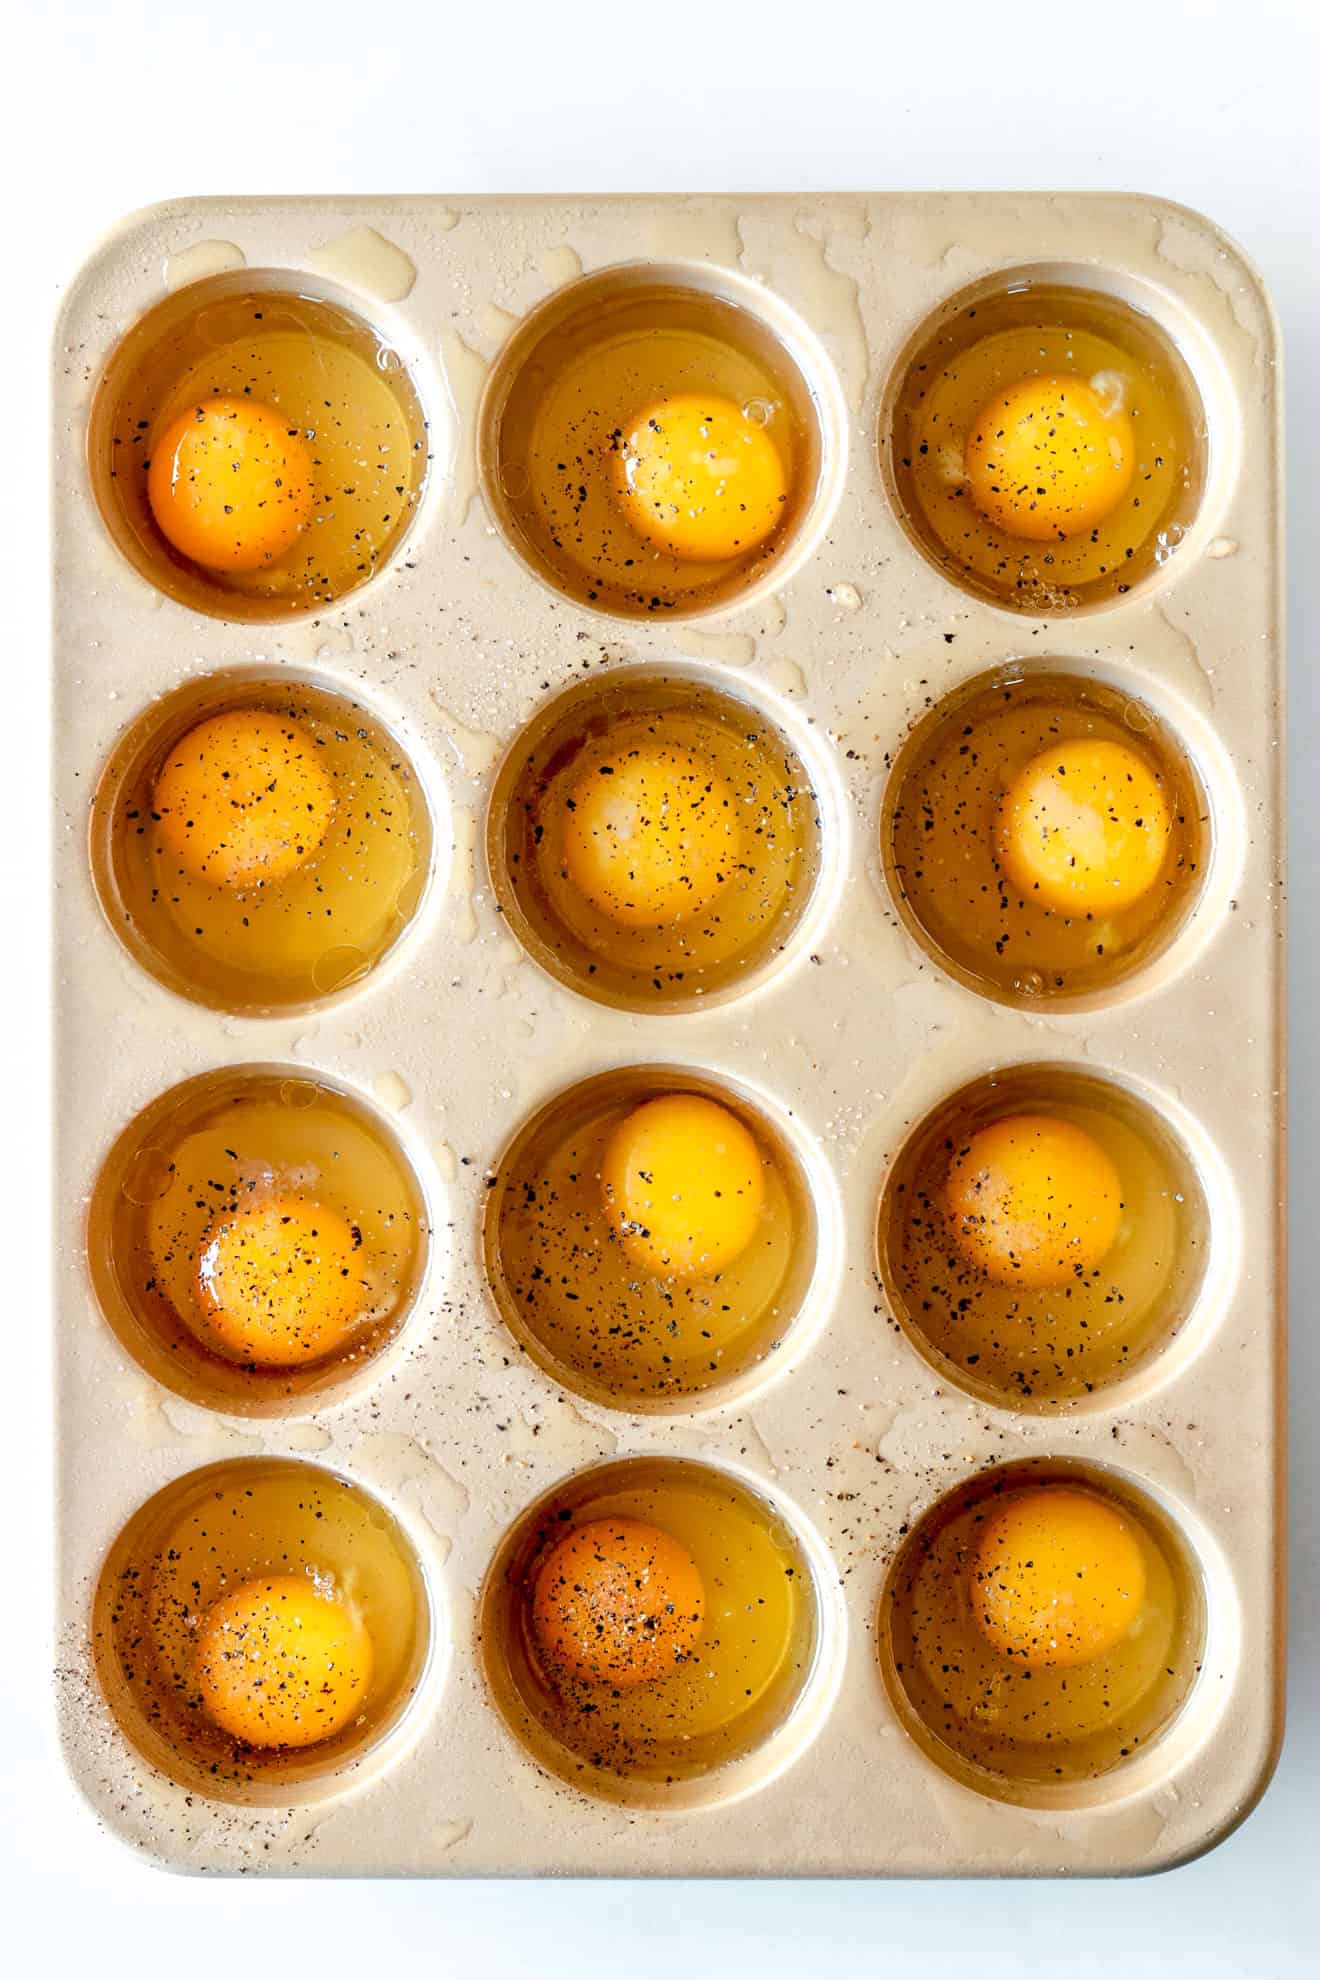 Oven Baked Eggs In A Muffin Tin The Toasted Pine Nut